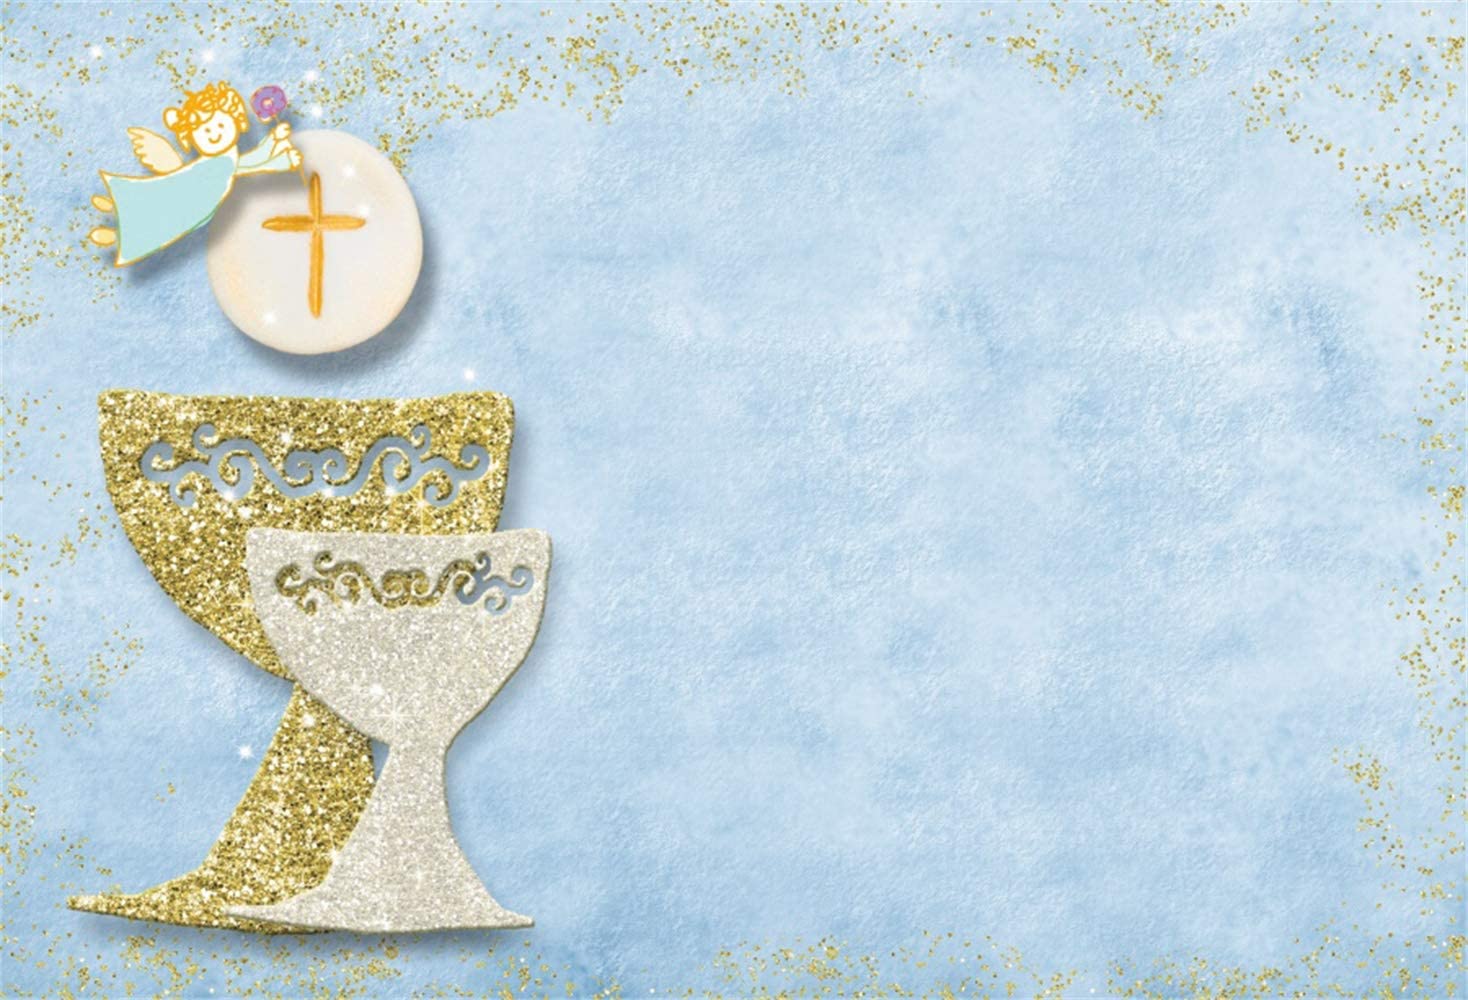 Amazon.com, Leowefowa First Holy Communion Backdrop 7x5ft Gold Silver Glitter Chalices Angel Cross Wafer Blurry Blue Vinyl Boy Baptism Photography Background Communion Party Banner Eucharist Wallpaper